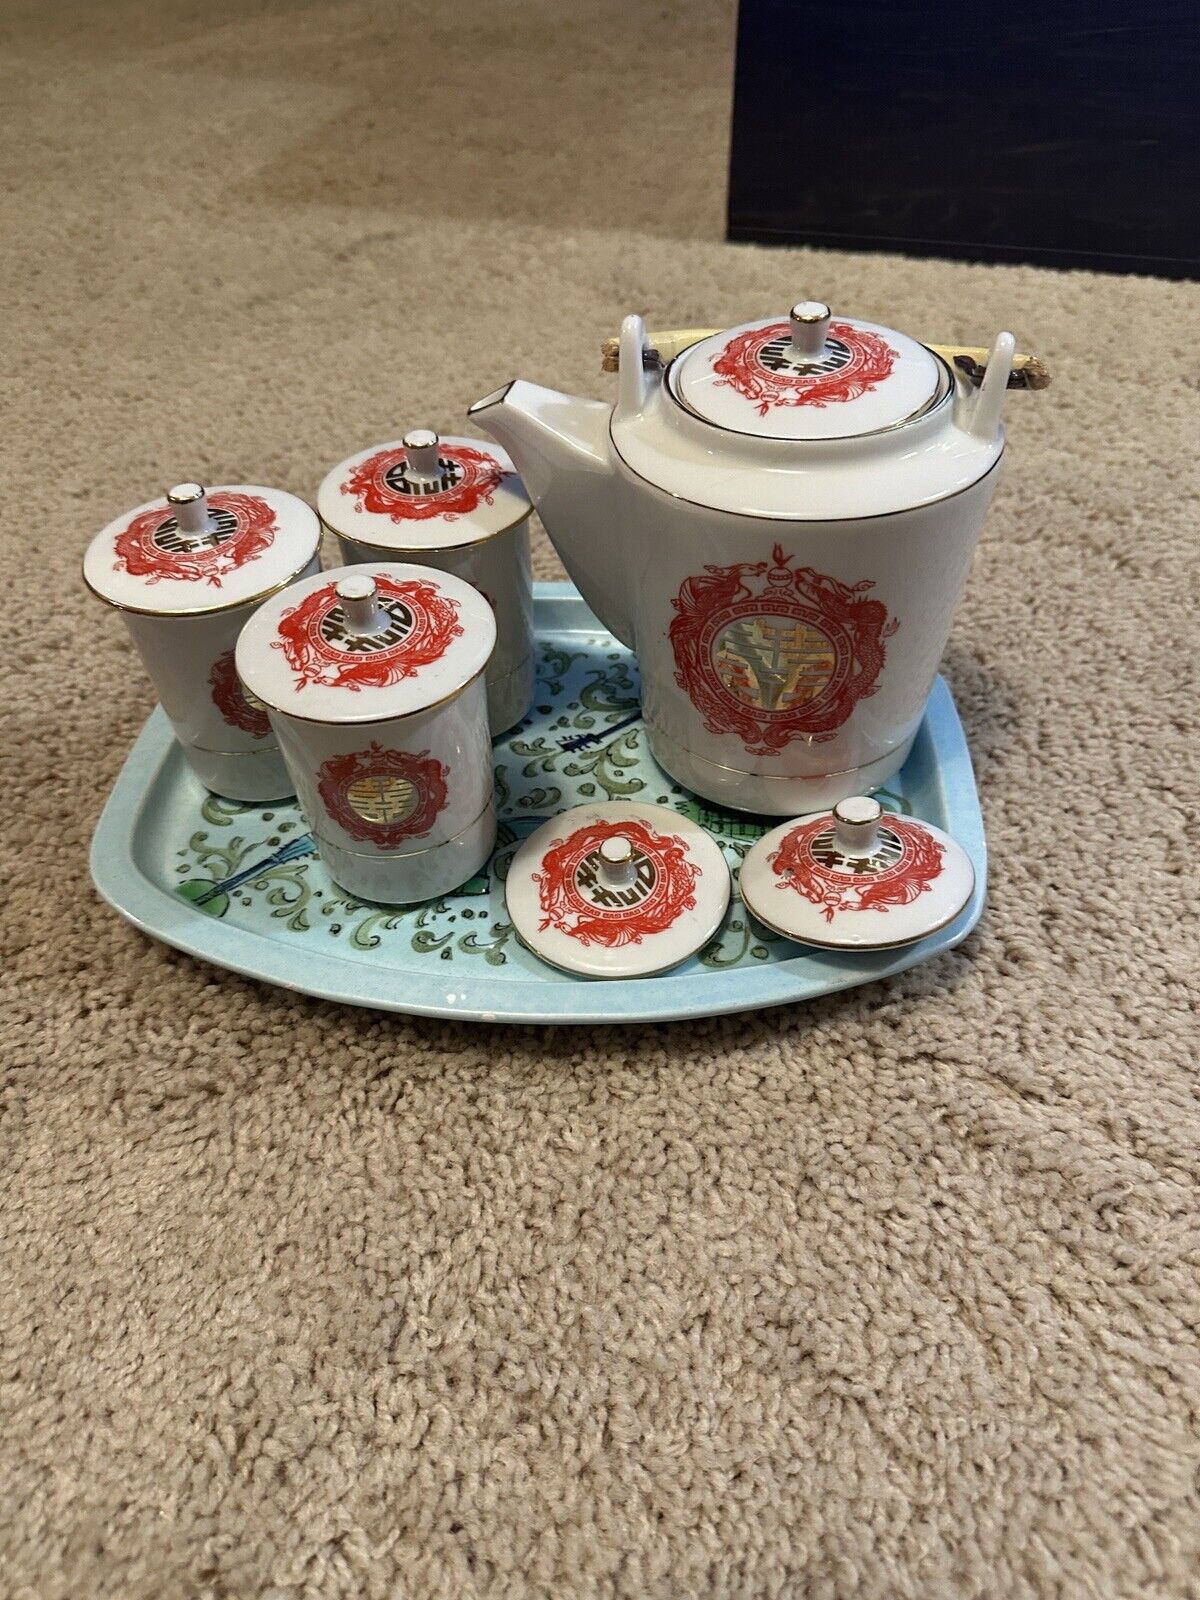 Vintage Asian Tea Set Red, White, with Dragon Teapot with Lid, 3 Teacups